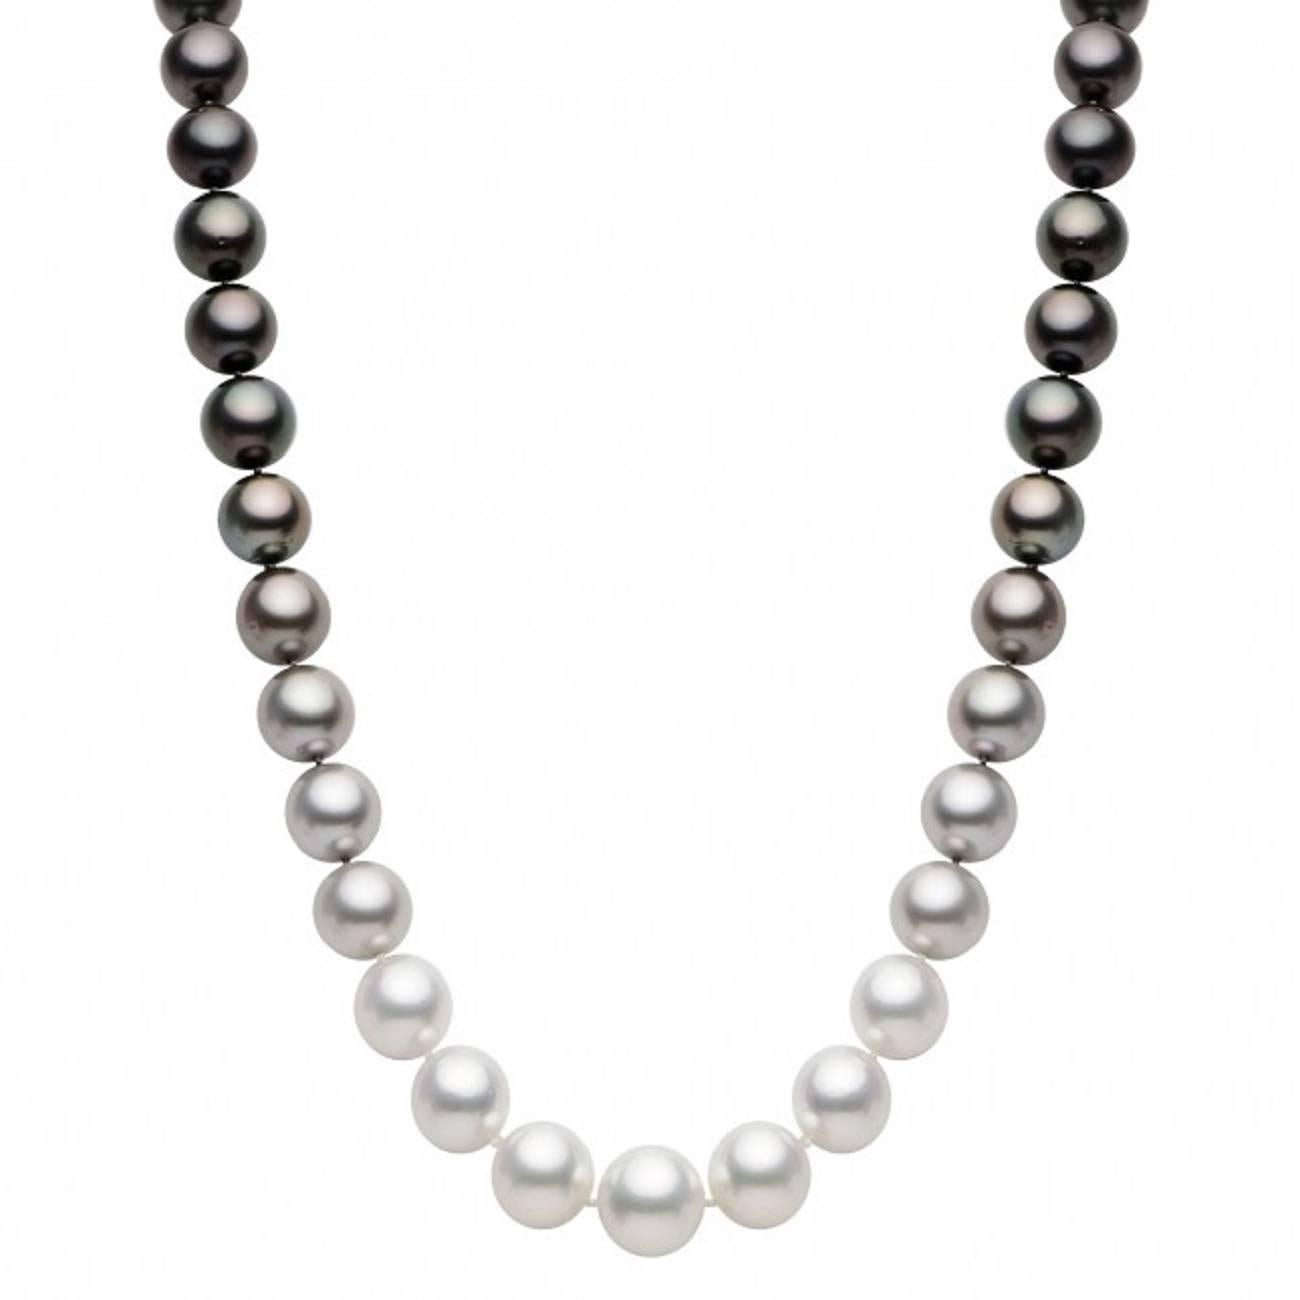  
Pearl Size	12-14mm
Nature	South Sea/Tahitian Cultured Pearl
Pearl Quality	AA
Pearl Shape	Round
Luster	AA, Excellent
Nacre	Very Thick
Jewelry Style	Necklace
14 K Scattered Diamond Clasp
18 " long
